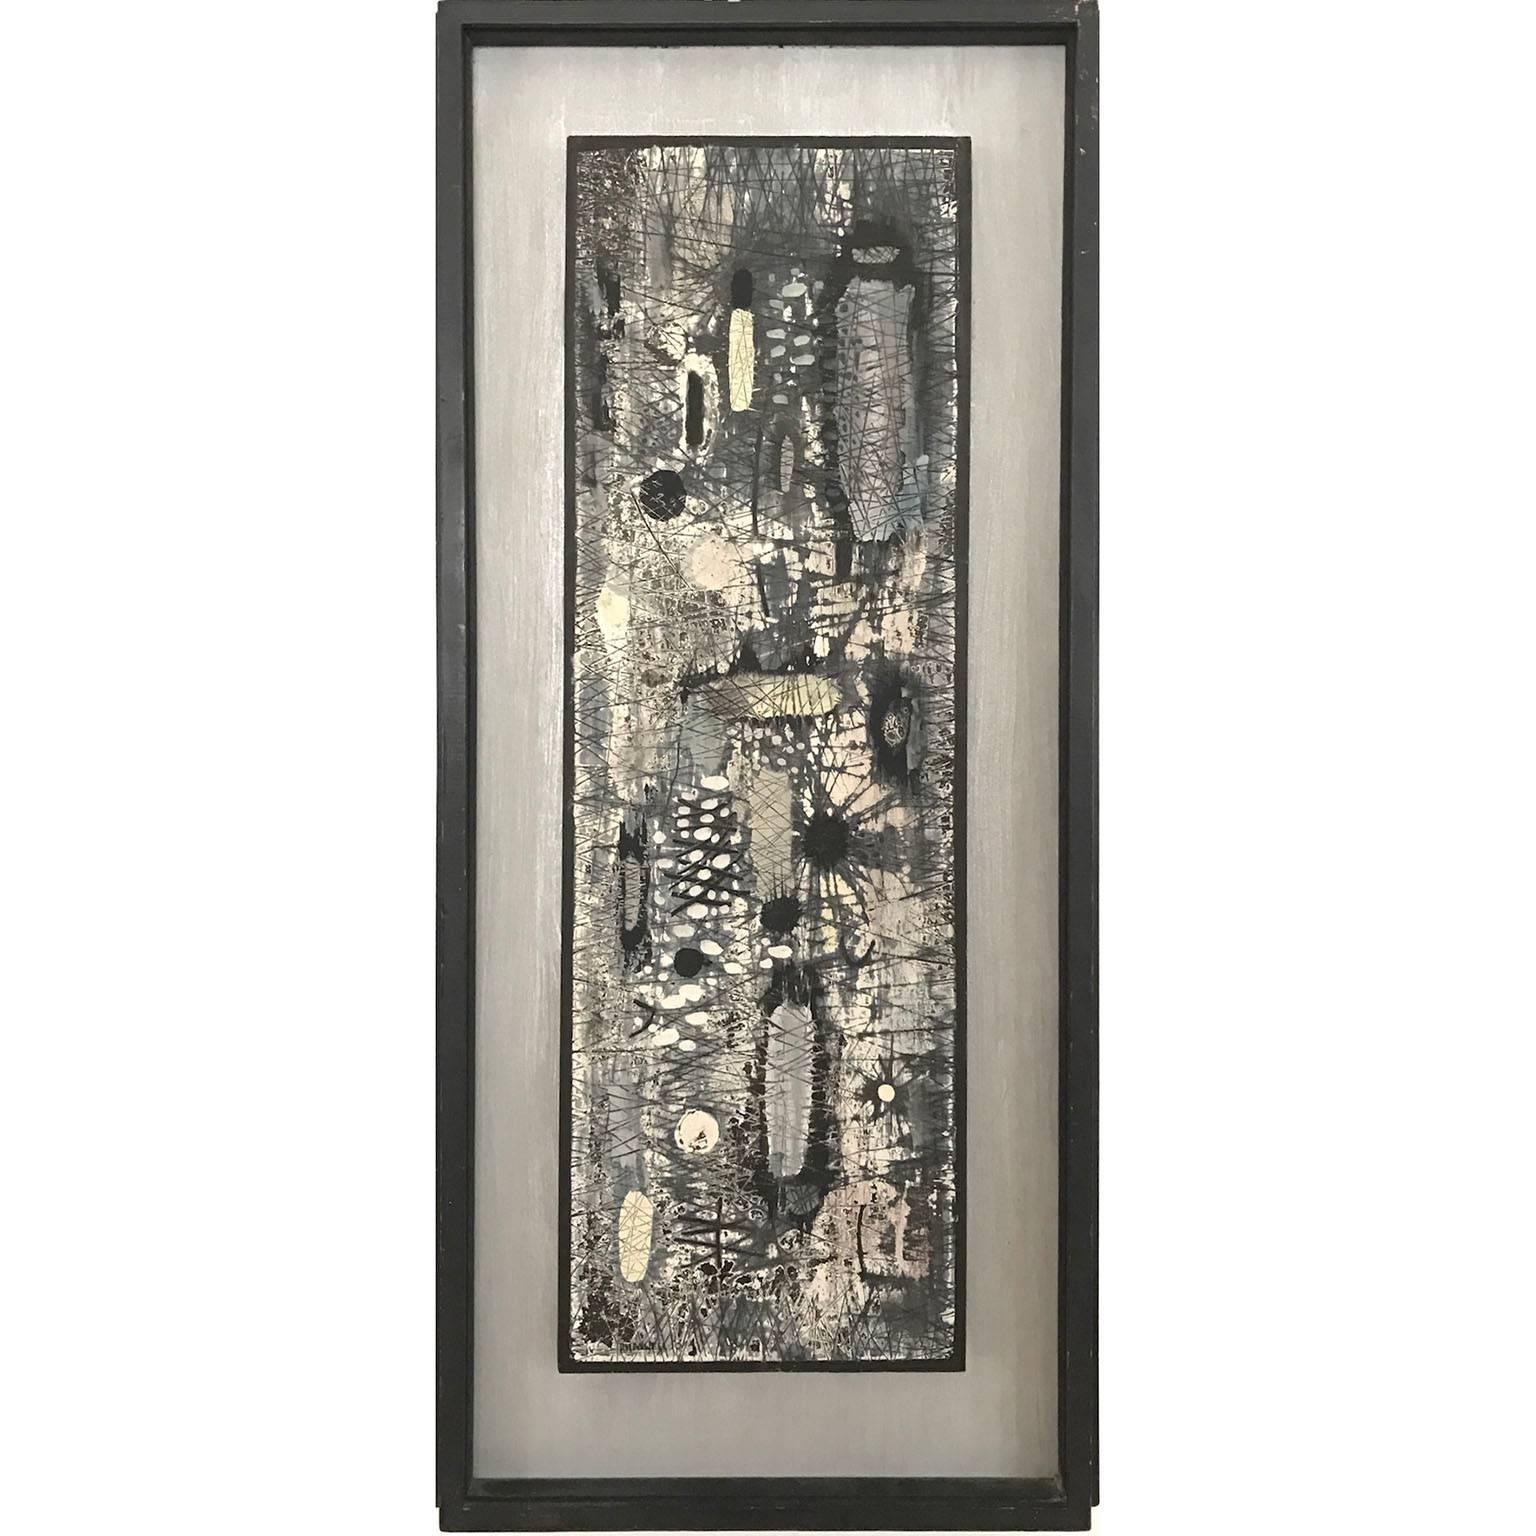 Paul Maxwell Abstract Painting - "Burned Over" Black and White Modern Abstract Oil Painting